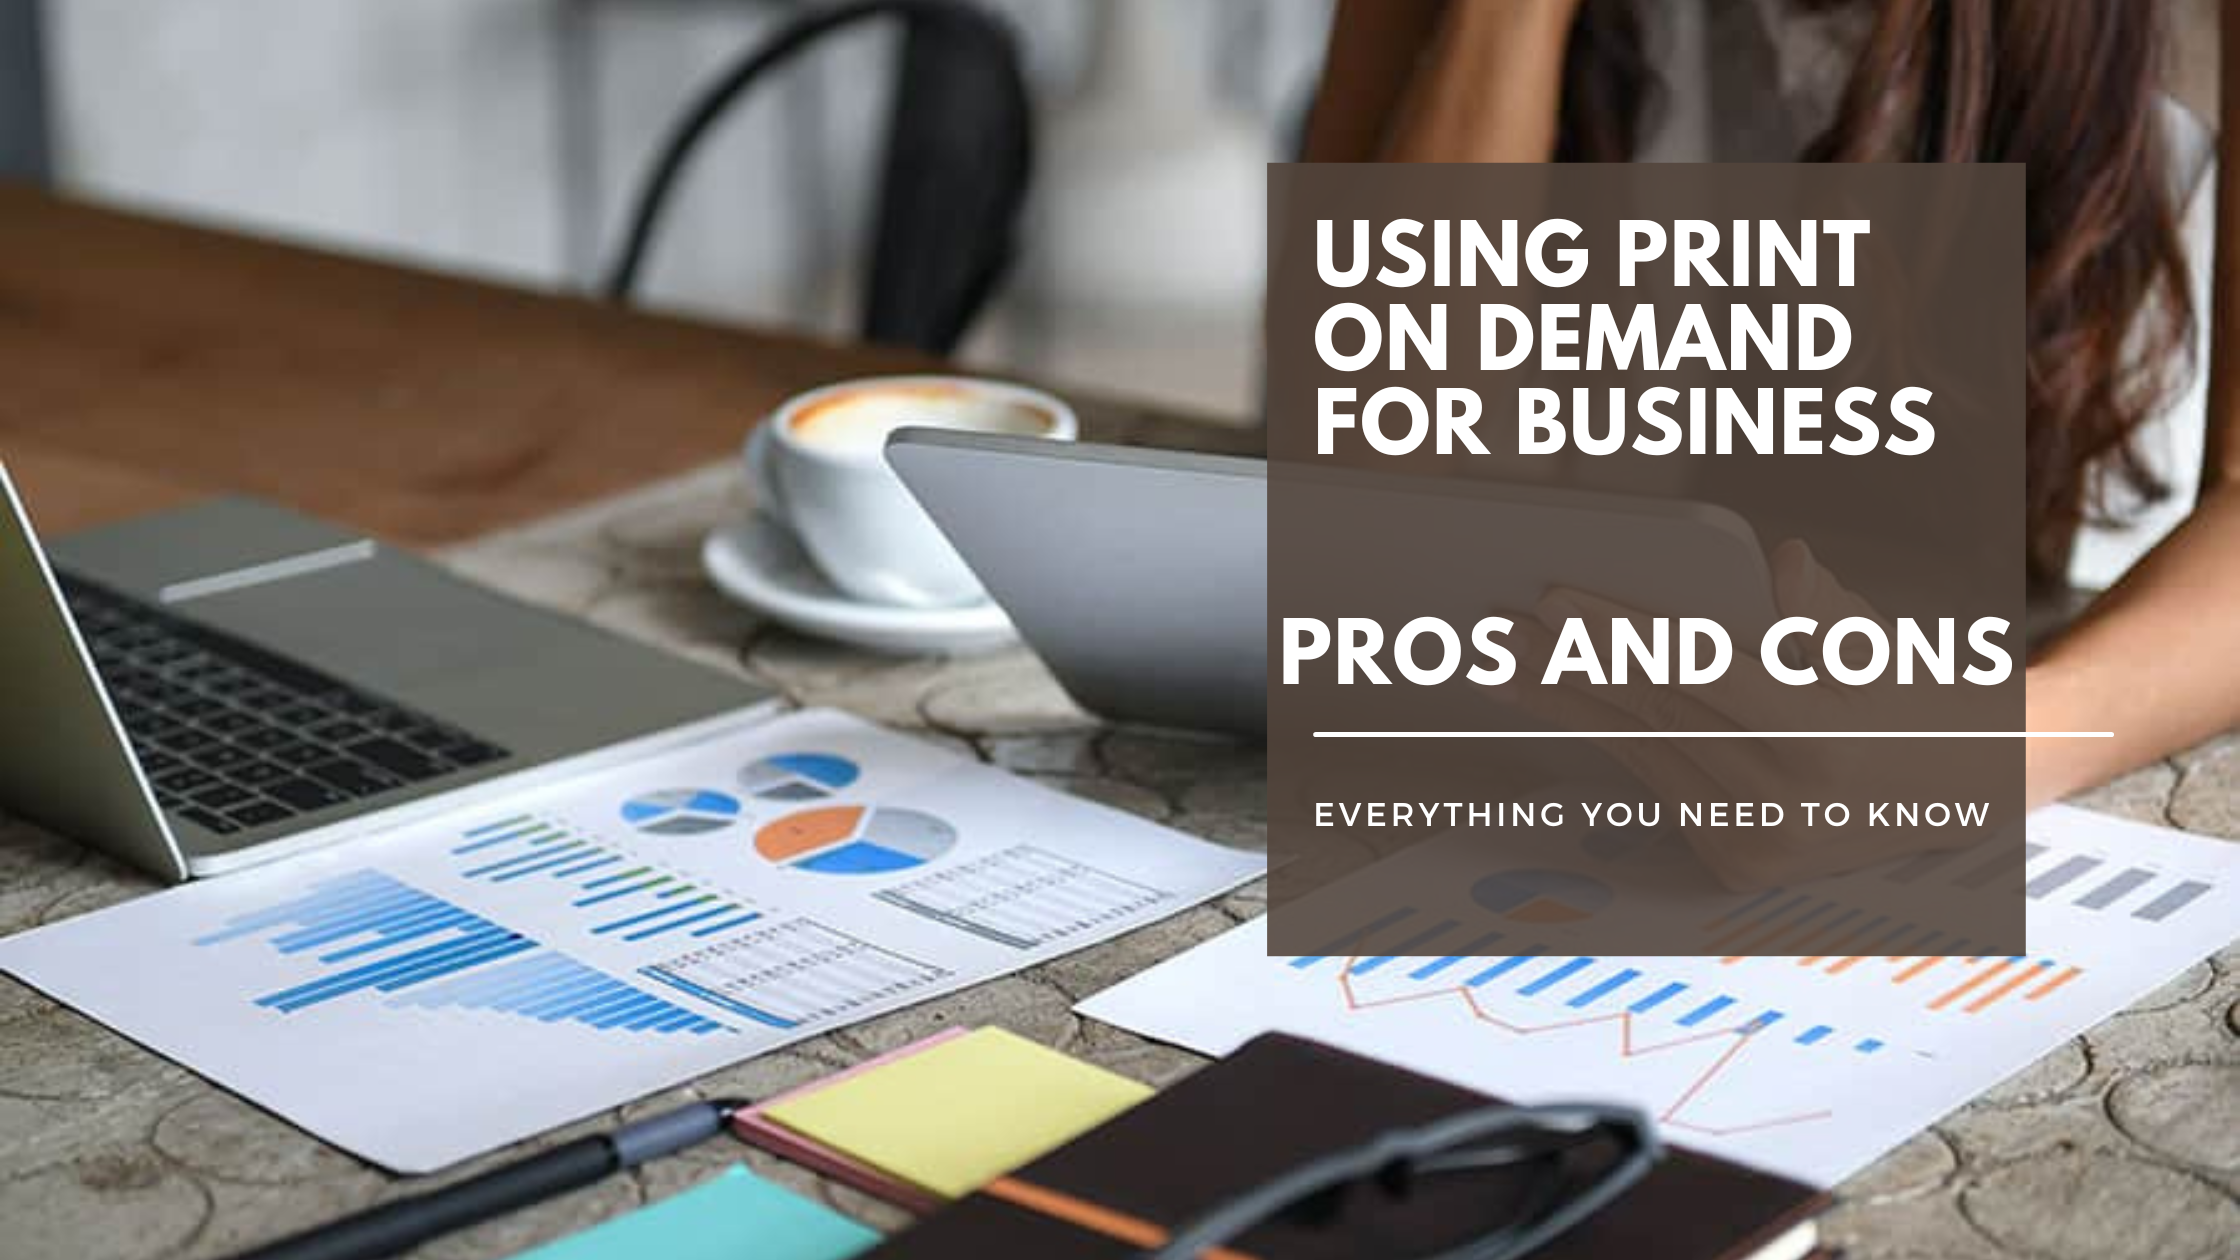 The Pros and Cons of Using Print on Demand for Your Business